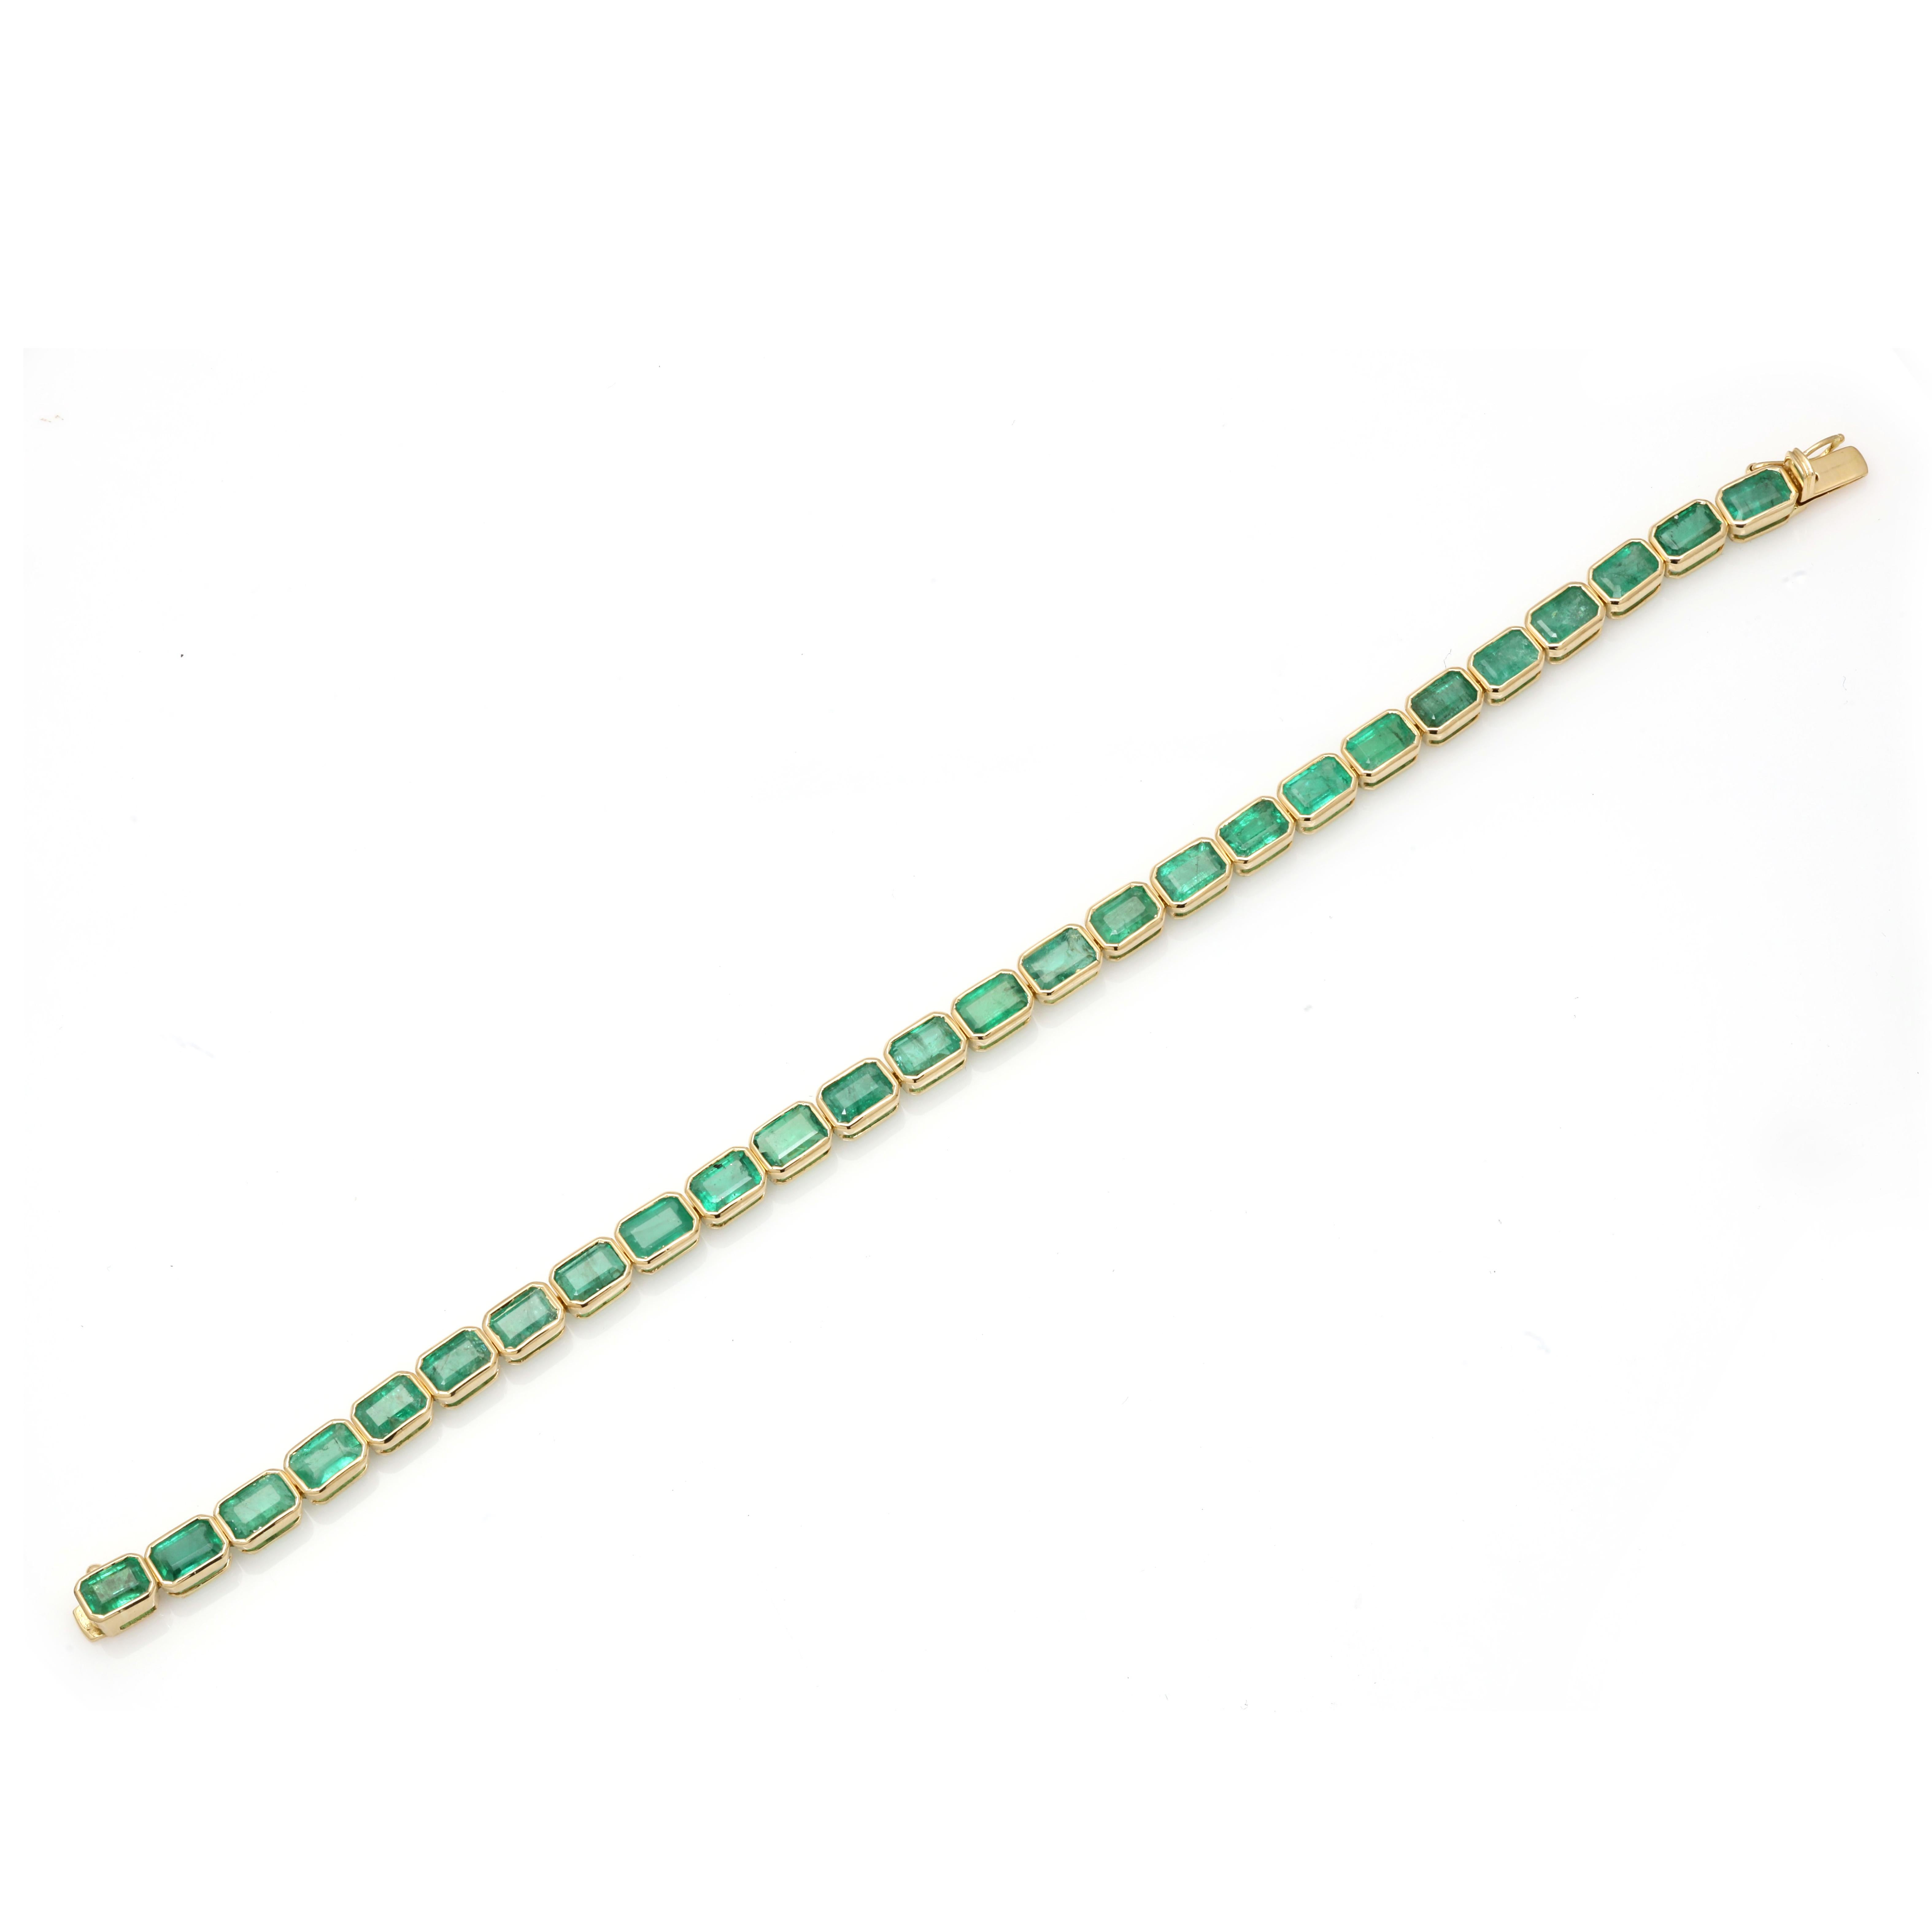 This Vivid Green Natural Emerald Tennis Bracelet Mounted in 18K gold showcases 26 endlessly sparkling natural emerald, weighing 12.5 carat. It measures 7.5 inches long in length.
Emerald gemstone enhances the intellectual capacity of the person.